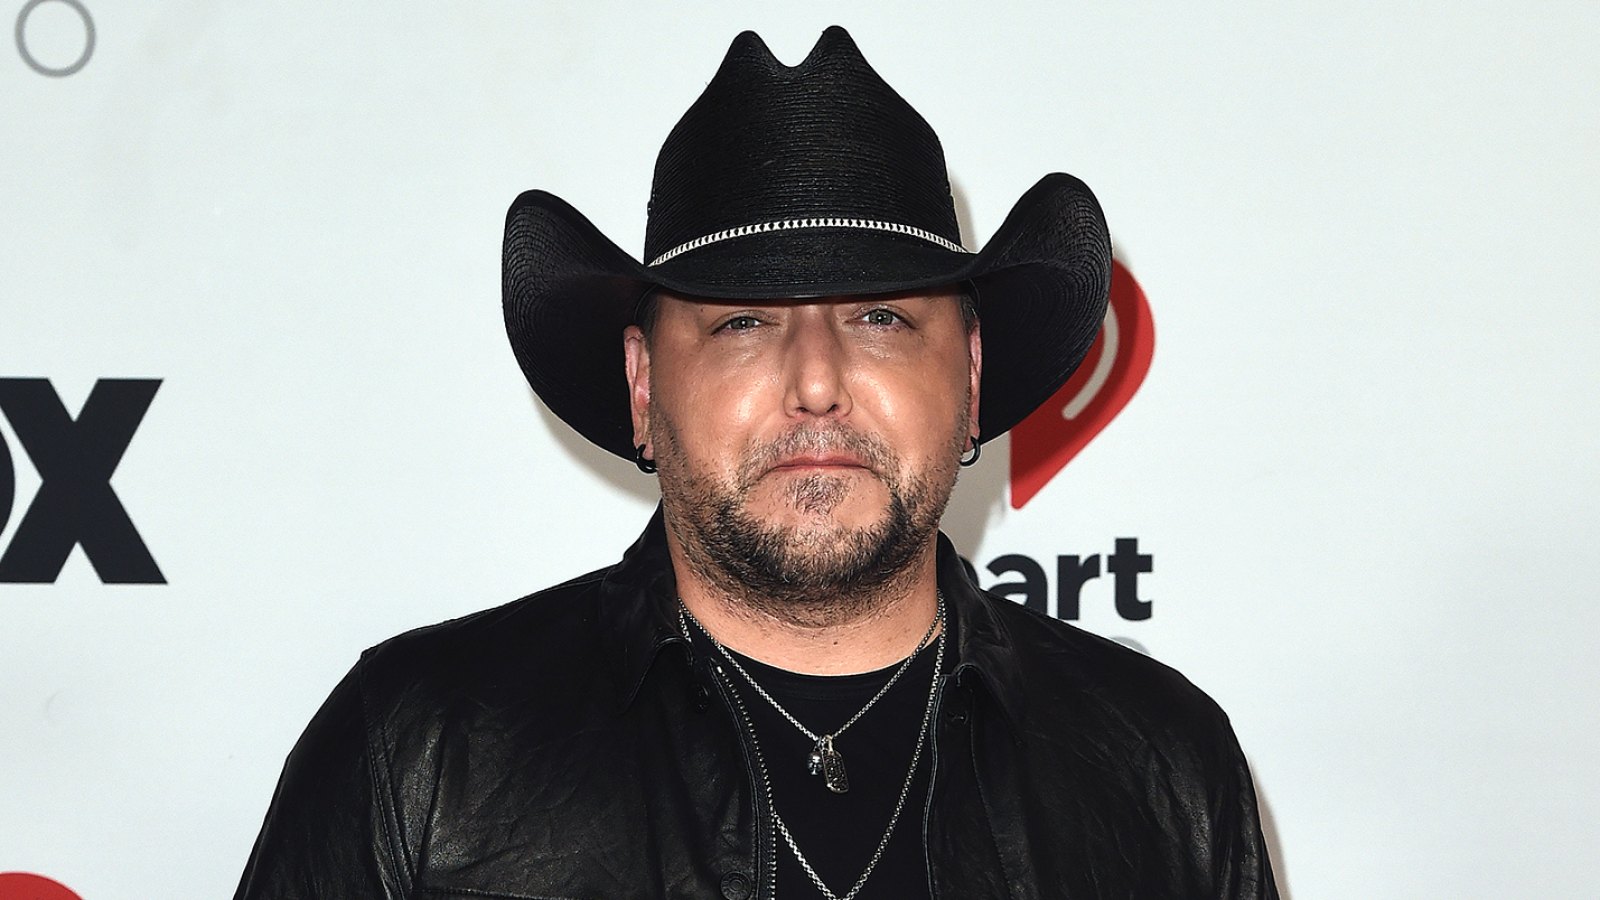 Jason Aldean Addresses the ‘Bulls—t’ of ‘Try That in a Small Town’ Lyric Perceptions